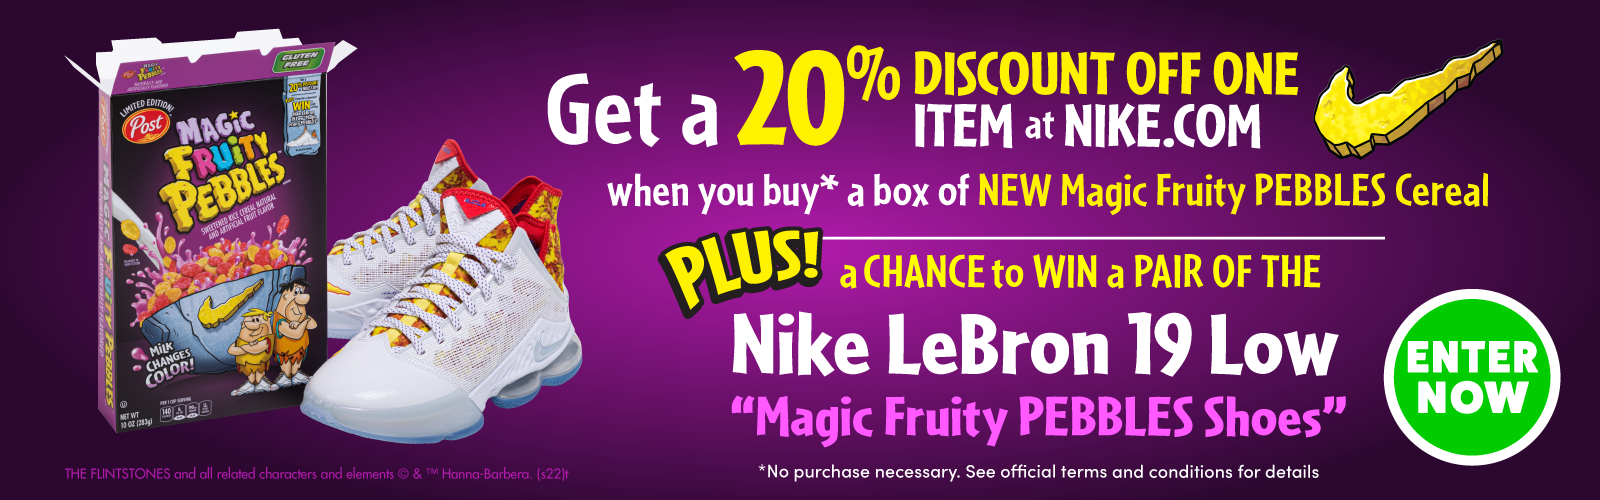 Magic Fruity PEBBLES Nike Discount and LeBron James contest